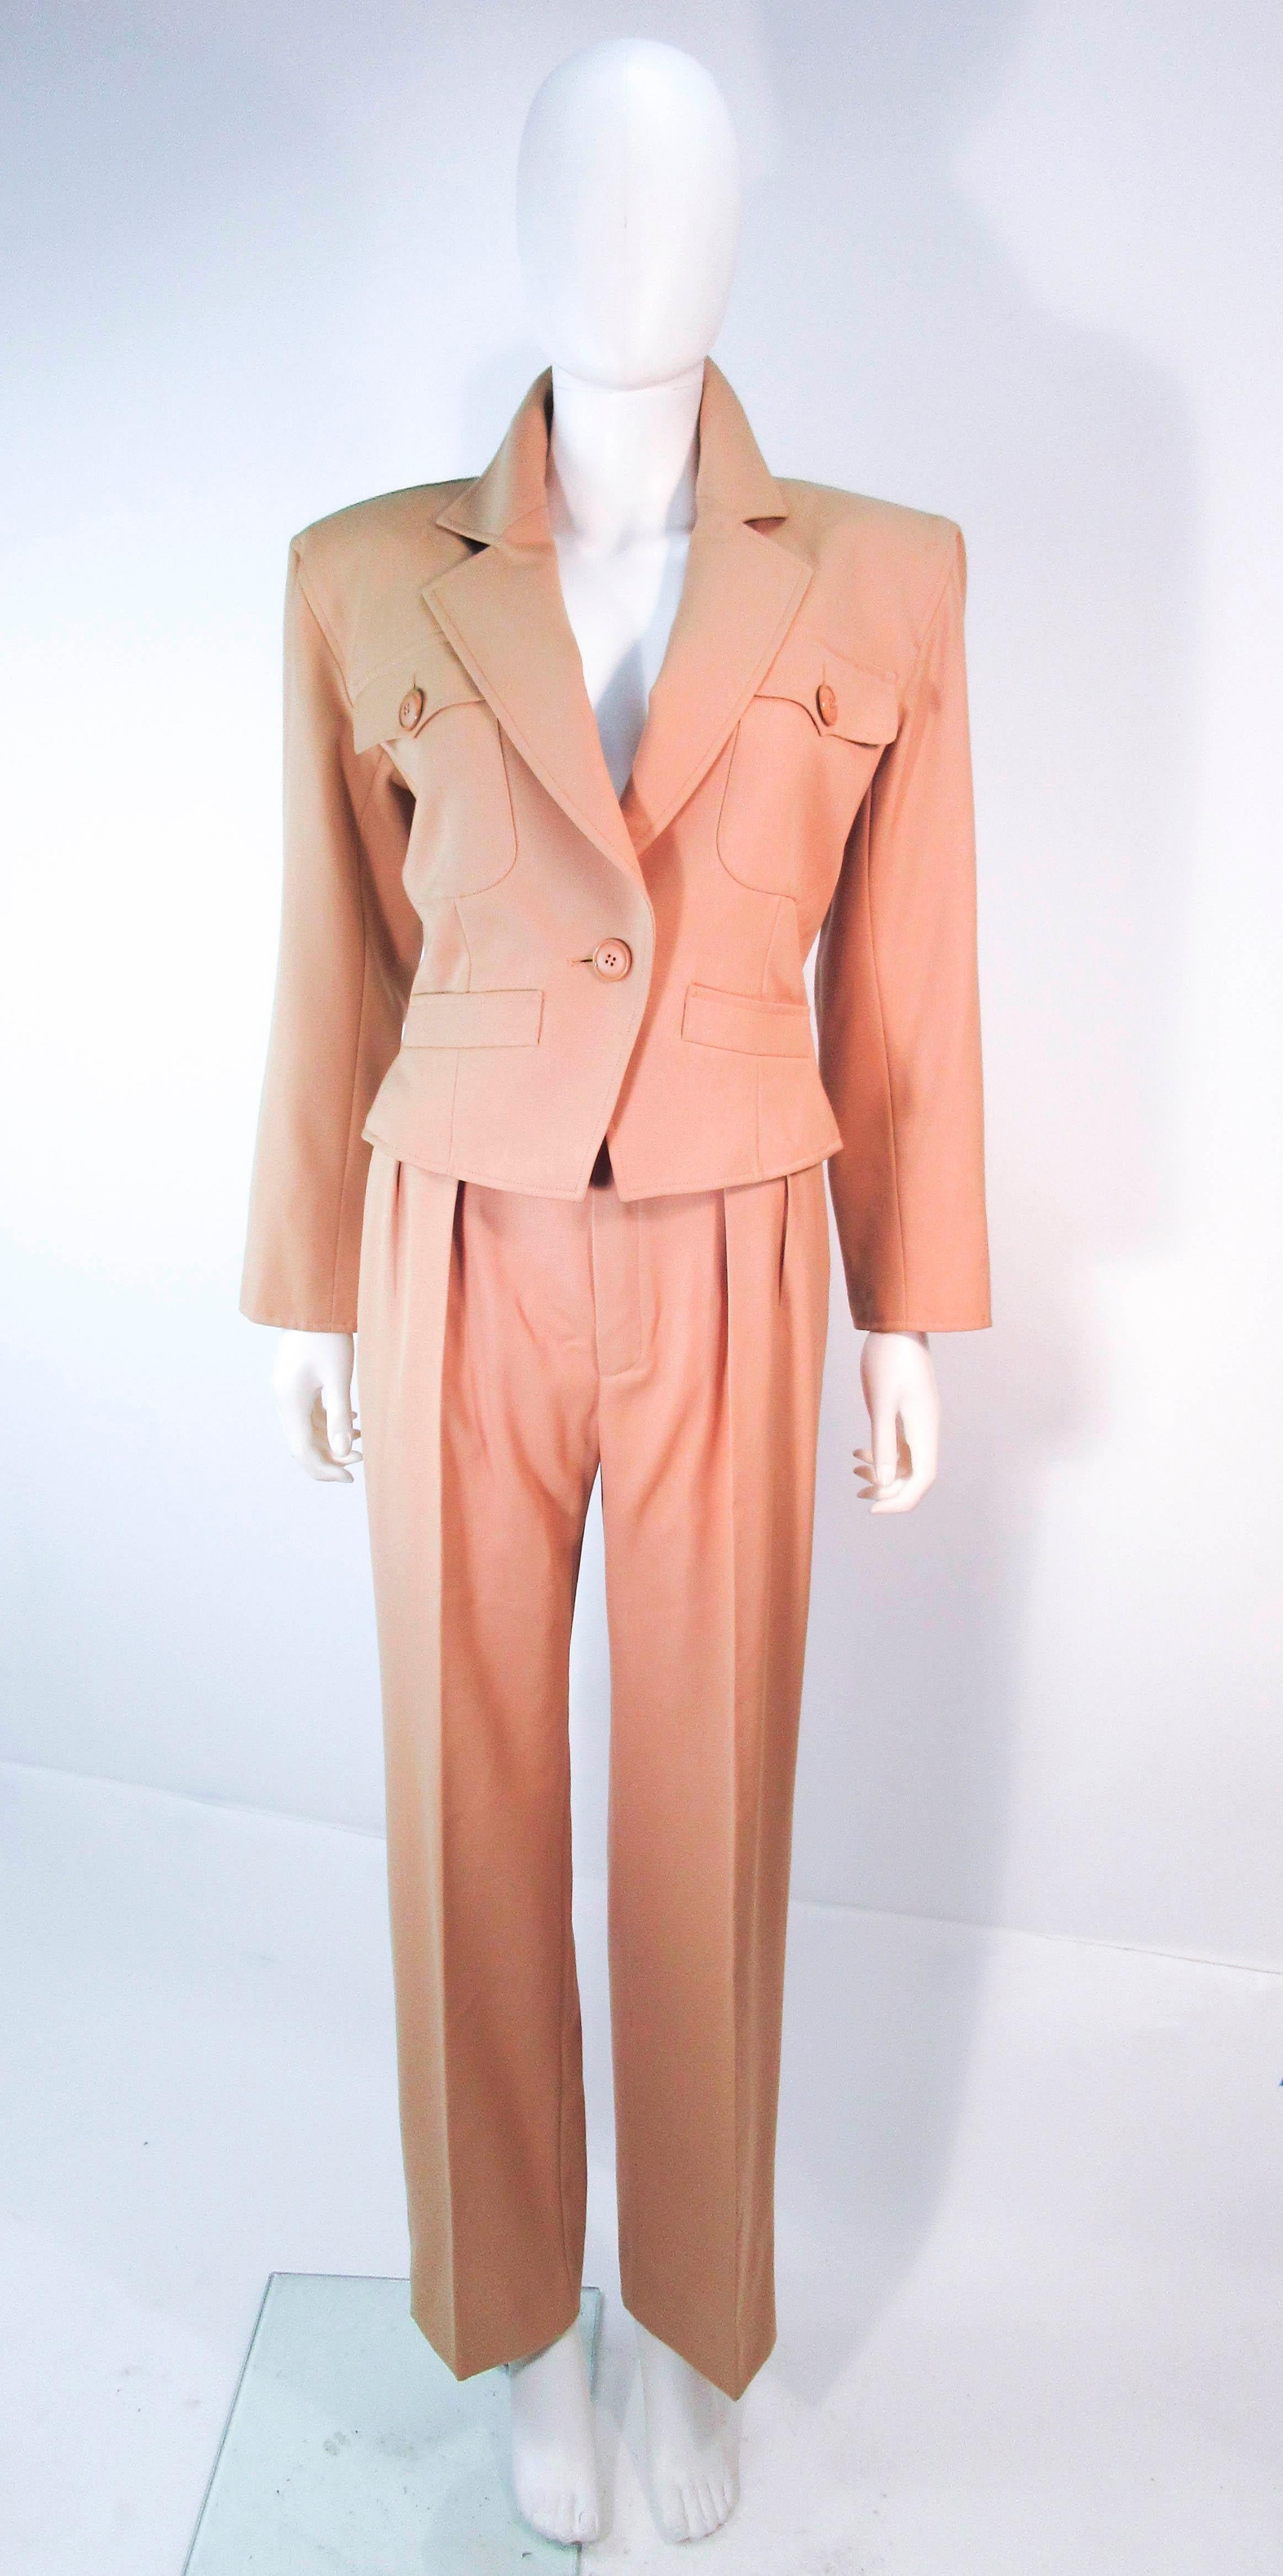 This Yves Saint Laurent suit is composed of a khaki wool. Features a classic YSL safari style with pleat front trousers and a classic pencil silhouette skirt. The jacket has center front button closures, while the pants and skirt have zipper